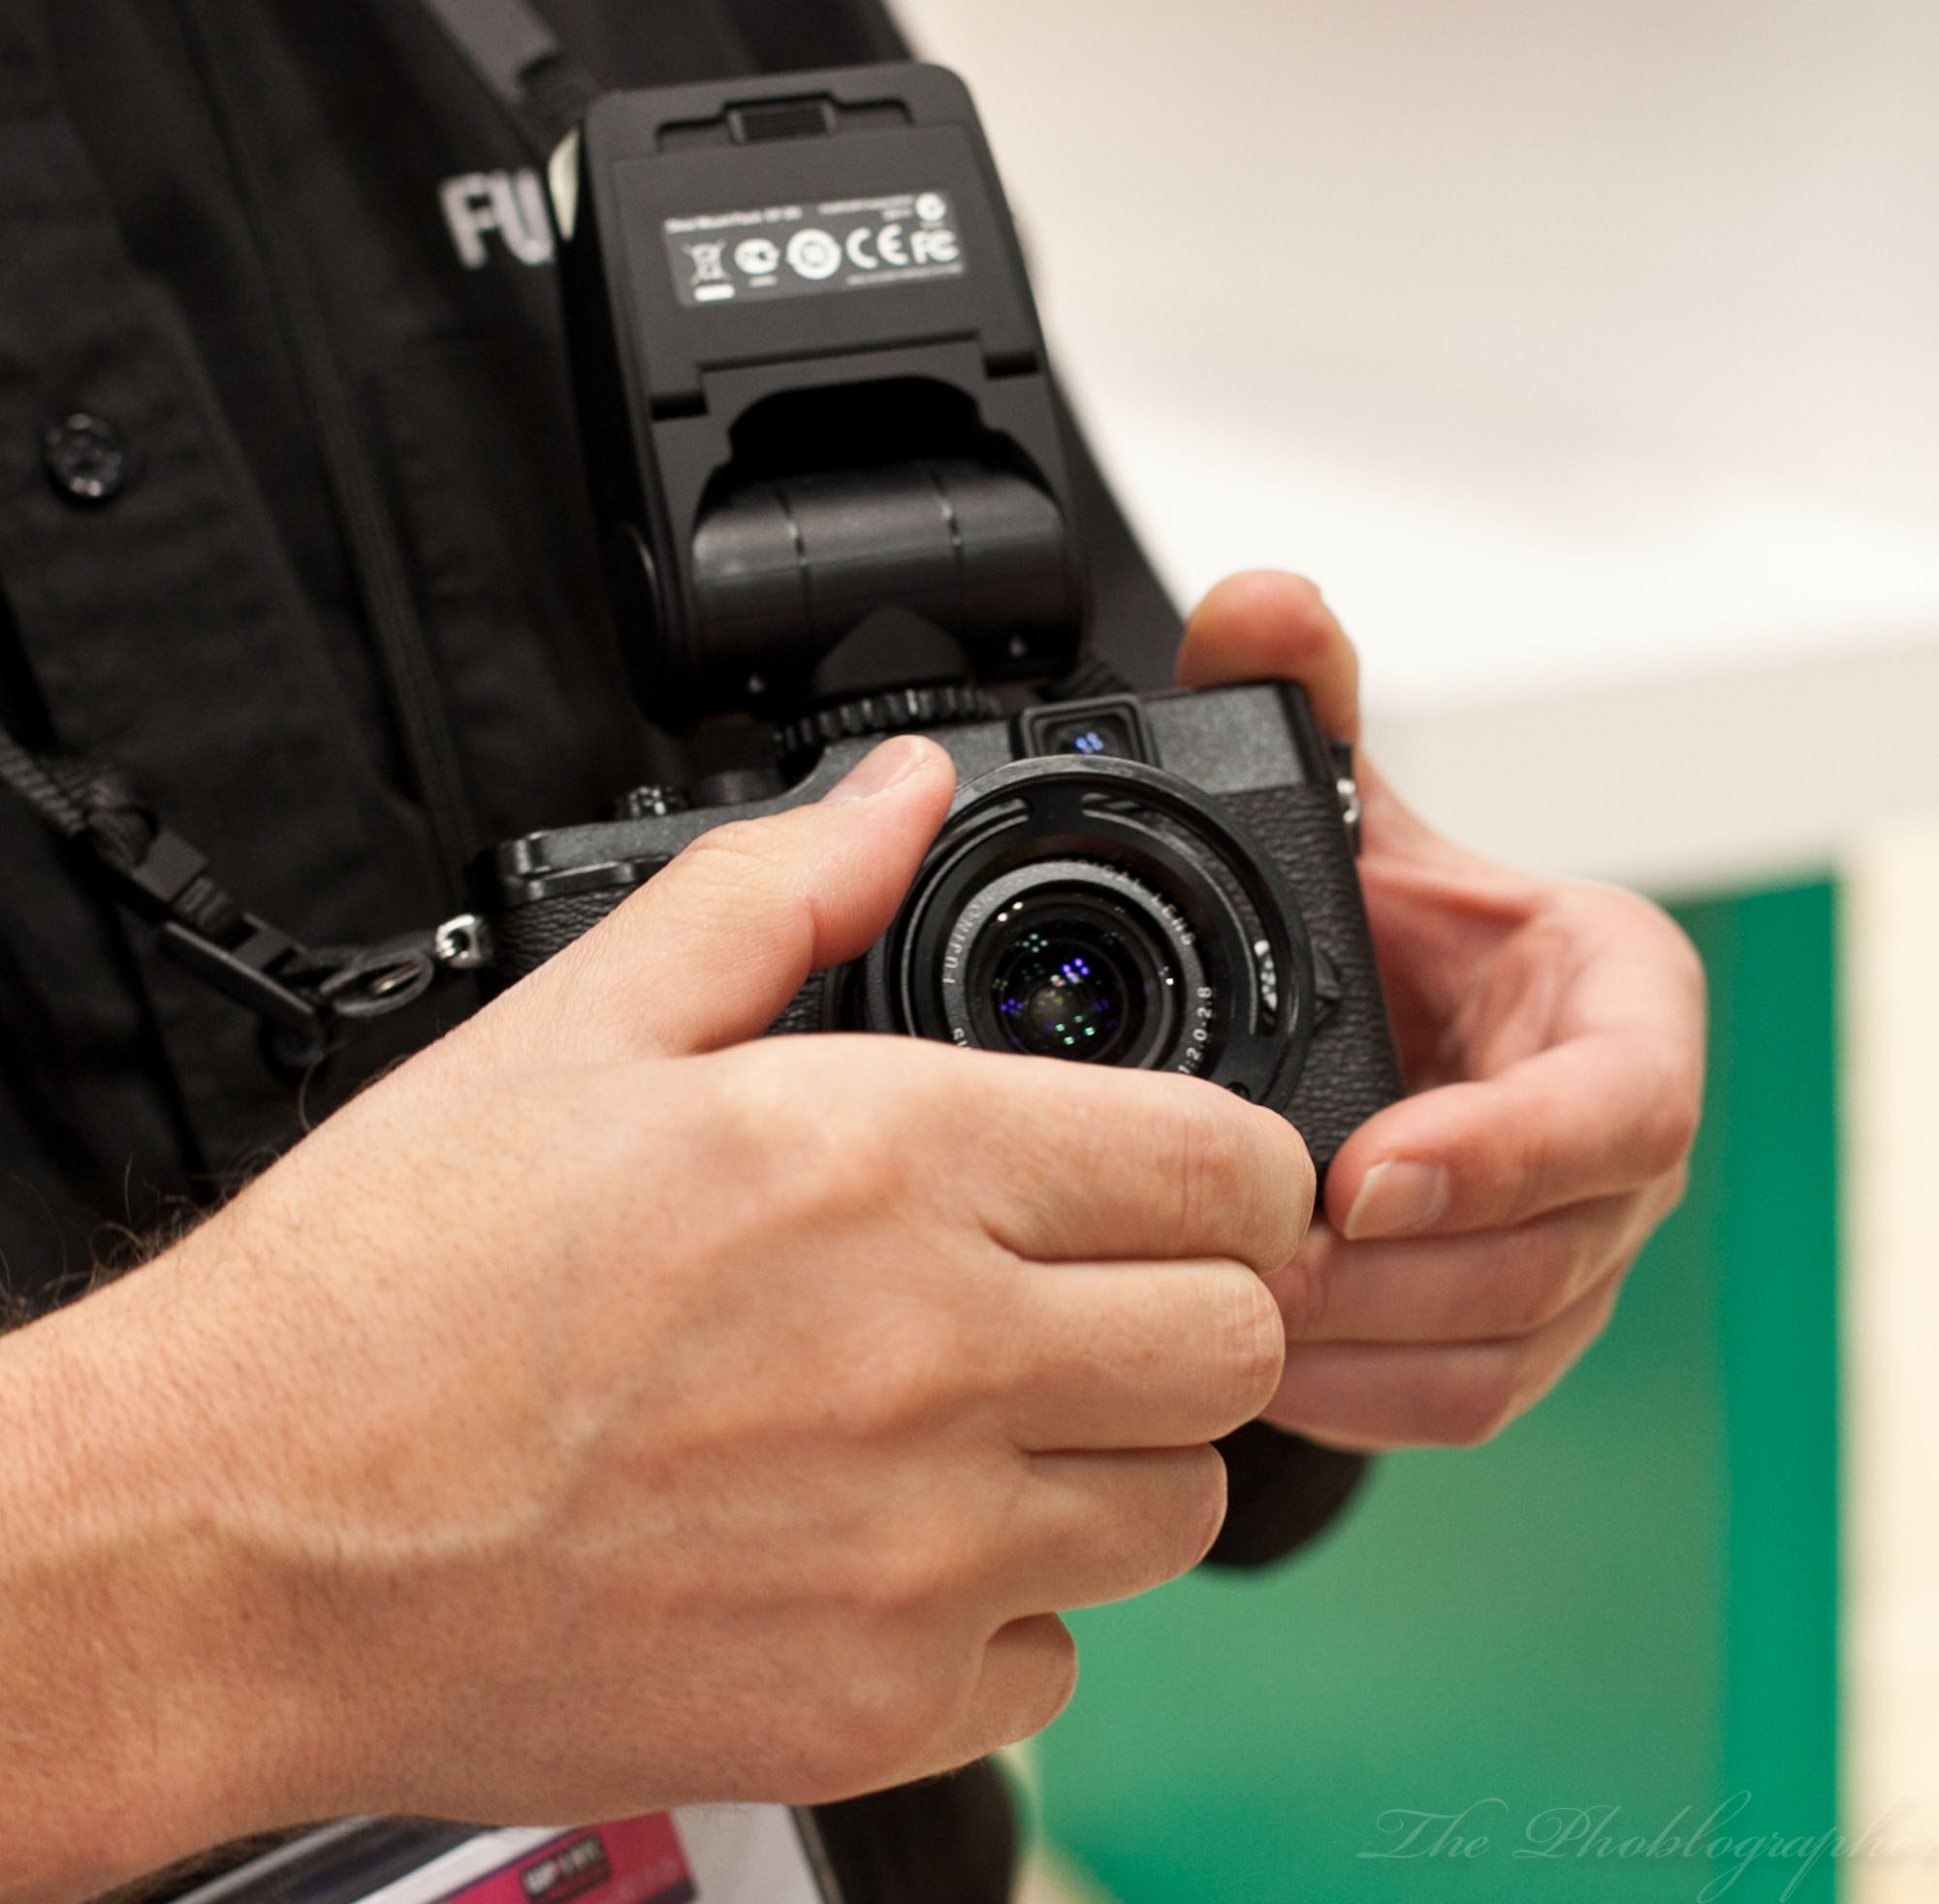 Hands On Review: a Party with Fuji X10 - The Phoblographer